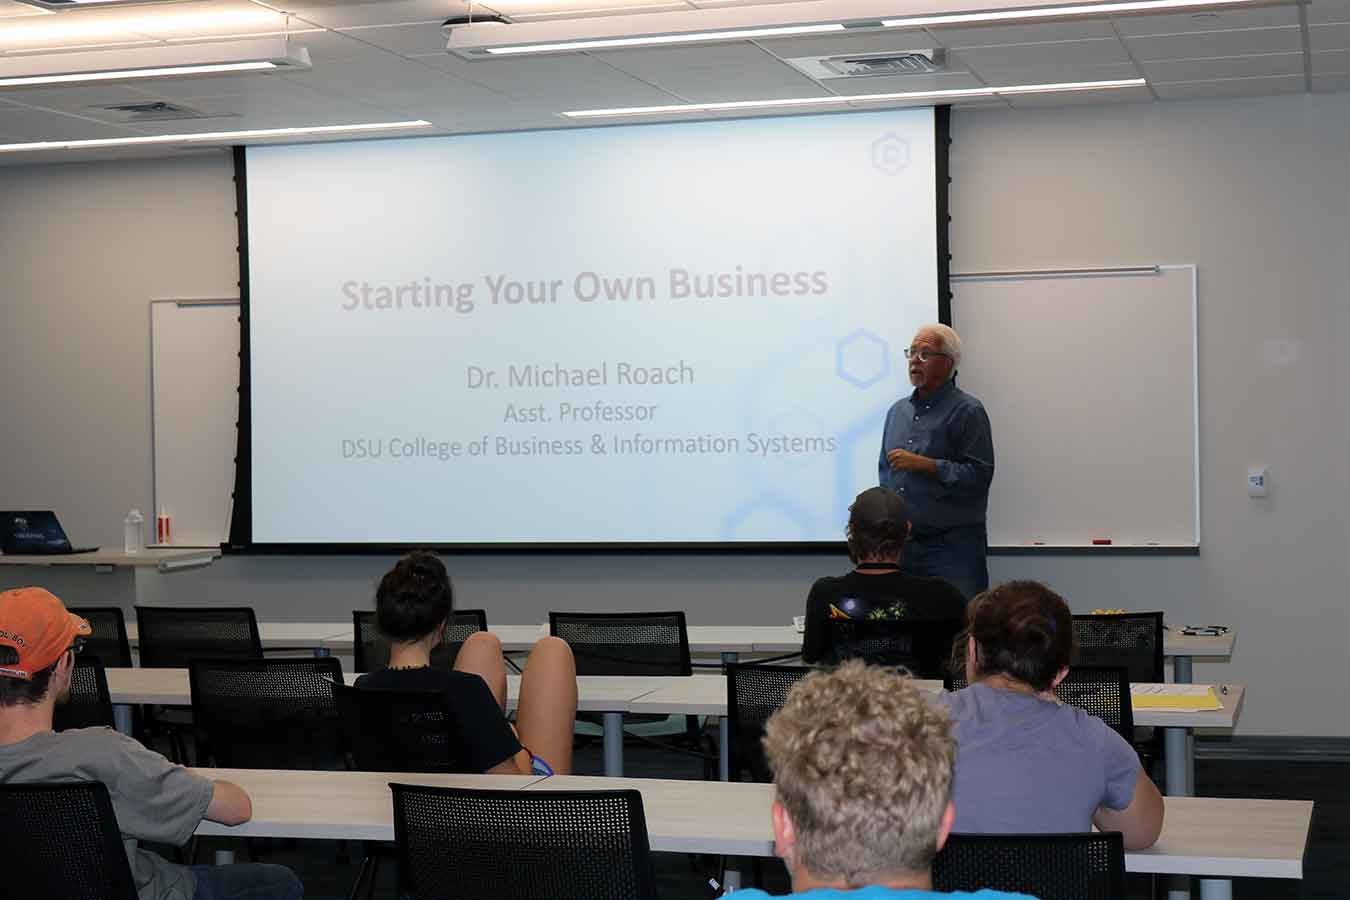 Dr. Michael Roach shares presentation on how to start a business